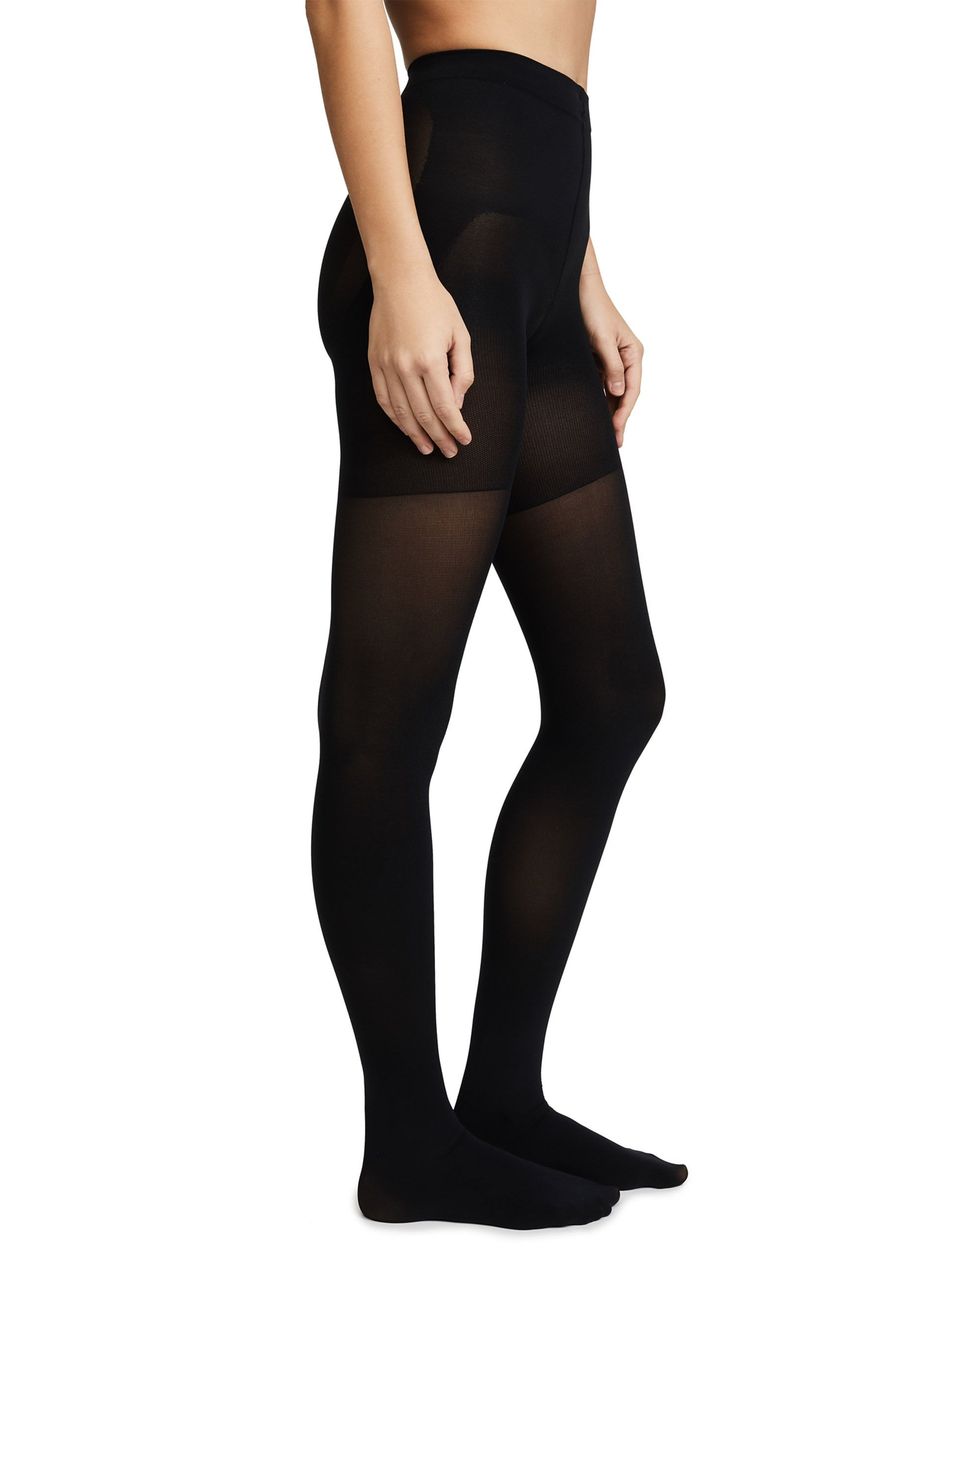 Buy Black Texture Thermal 100D Tights from Next Turkey